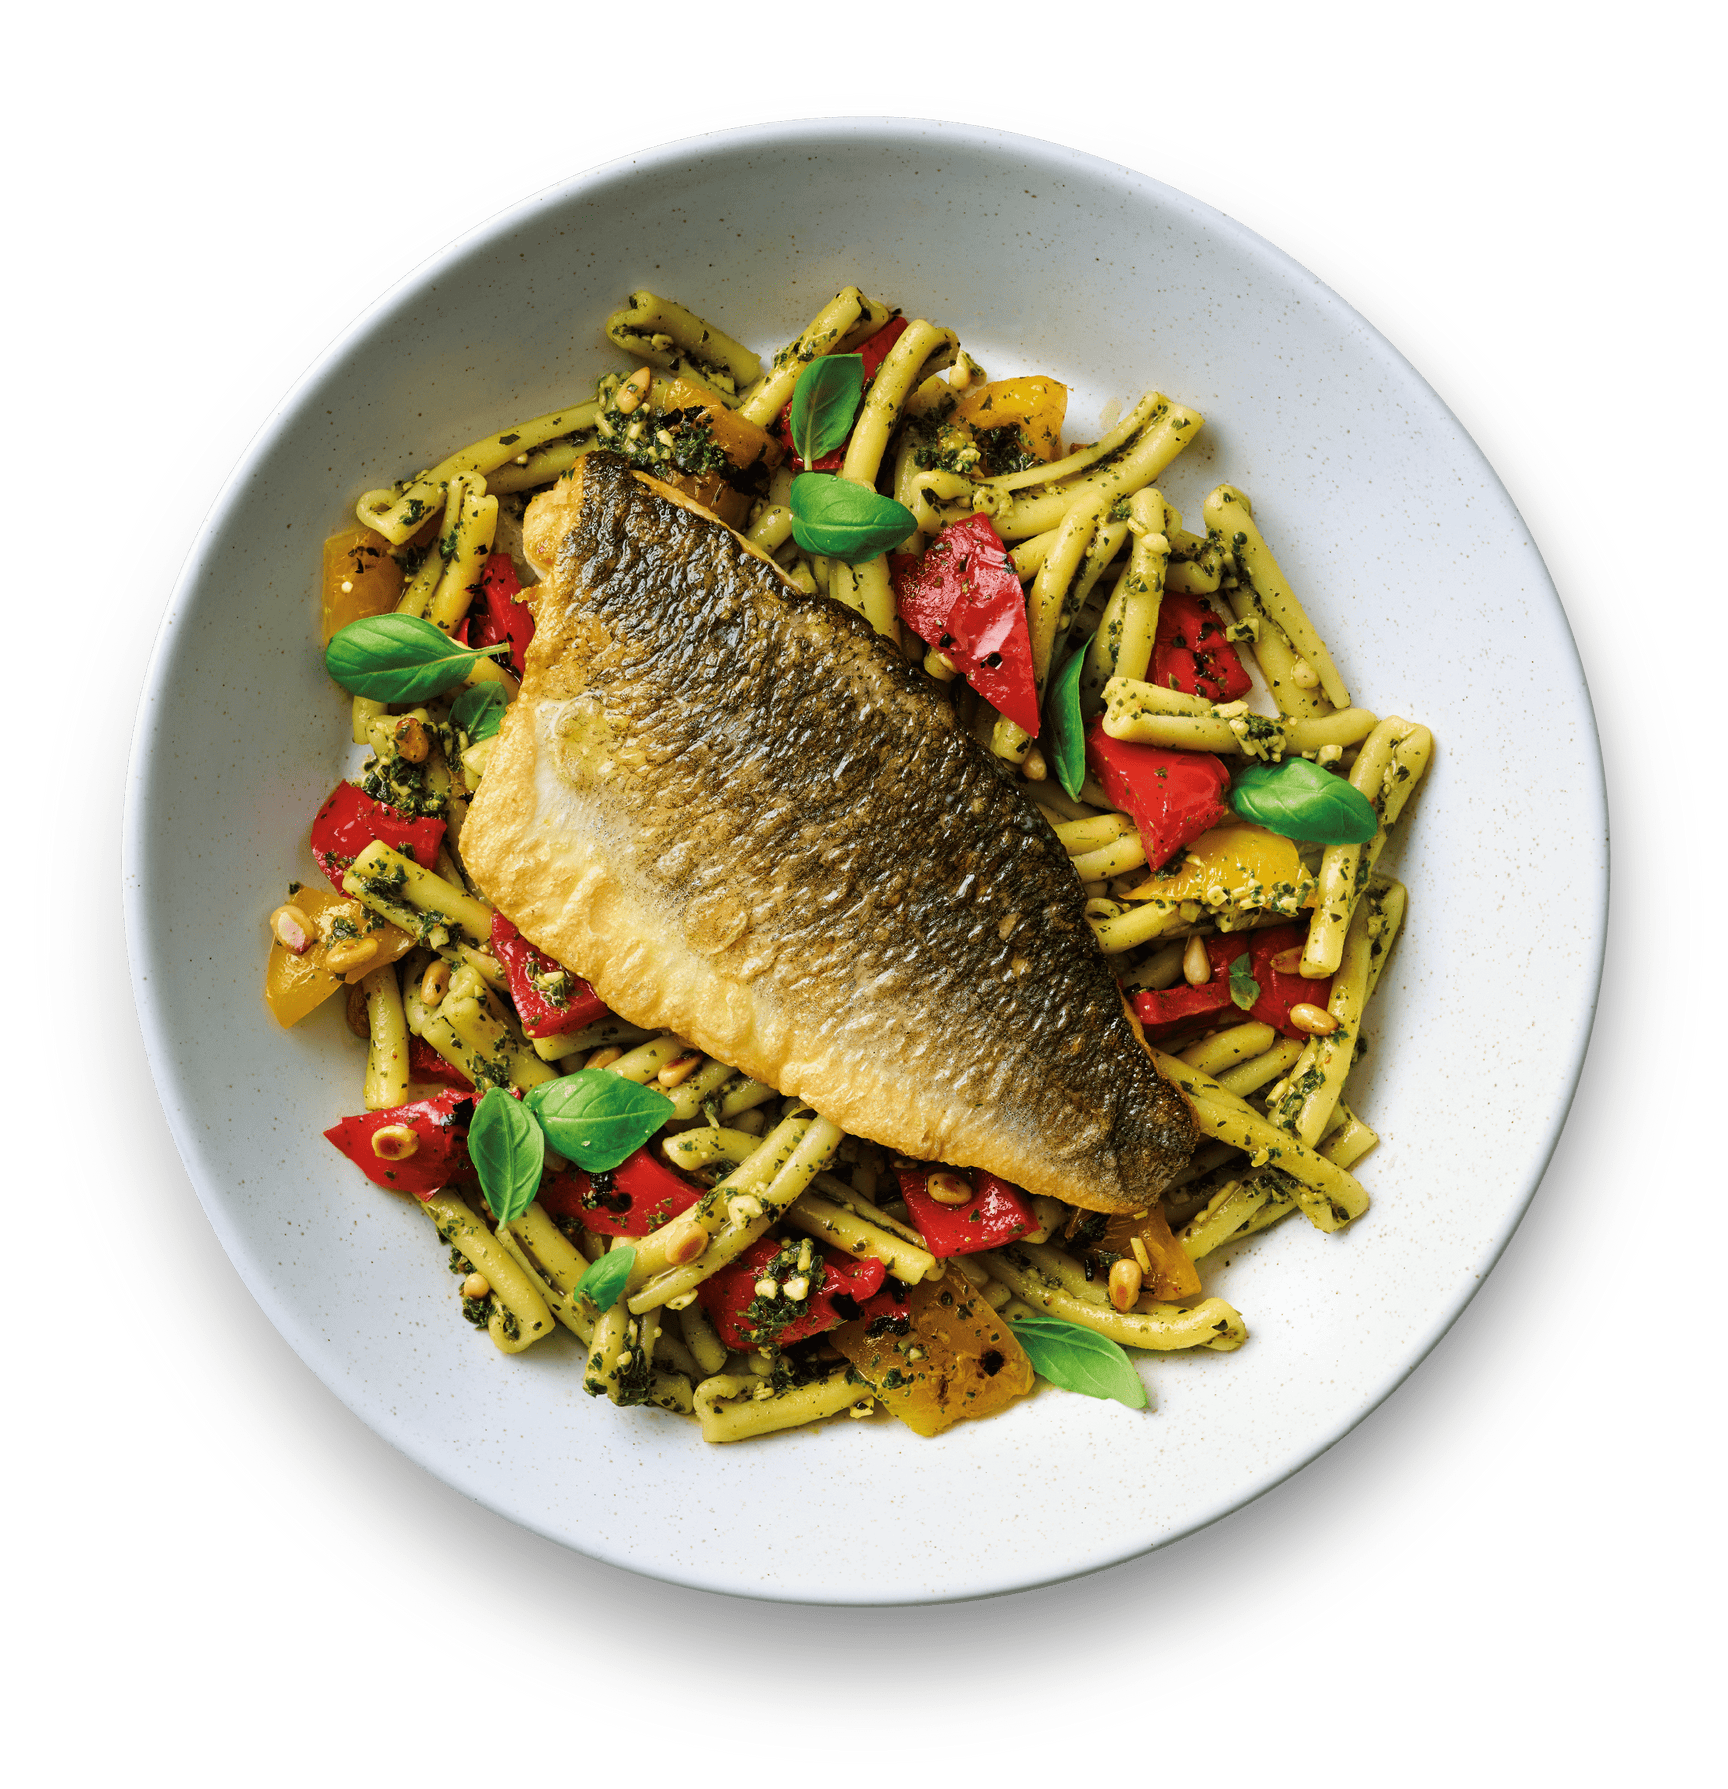 Fred's sea bass fillets with pesto pasta and peppers